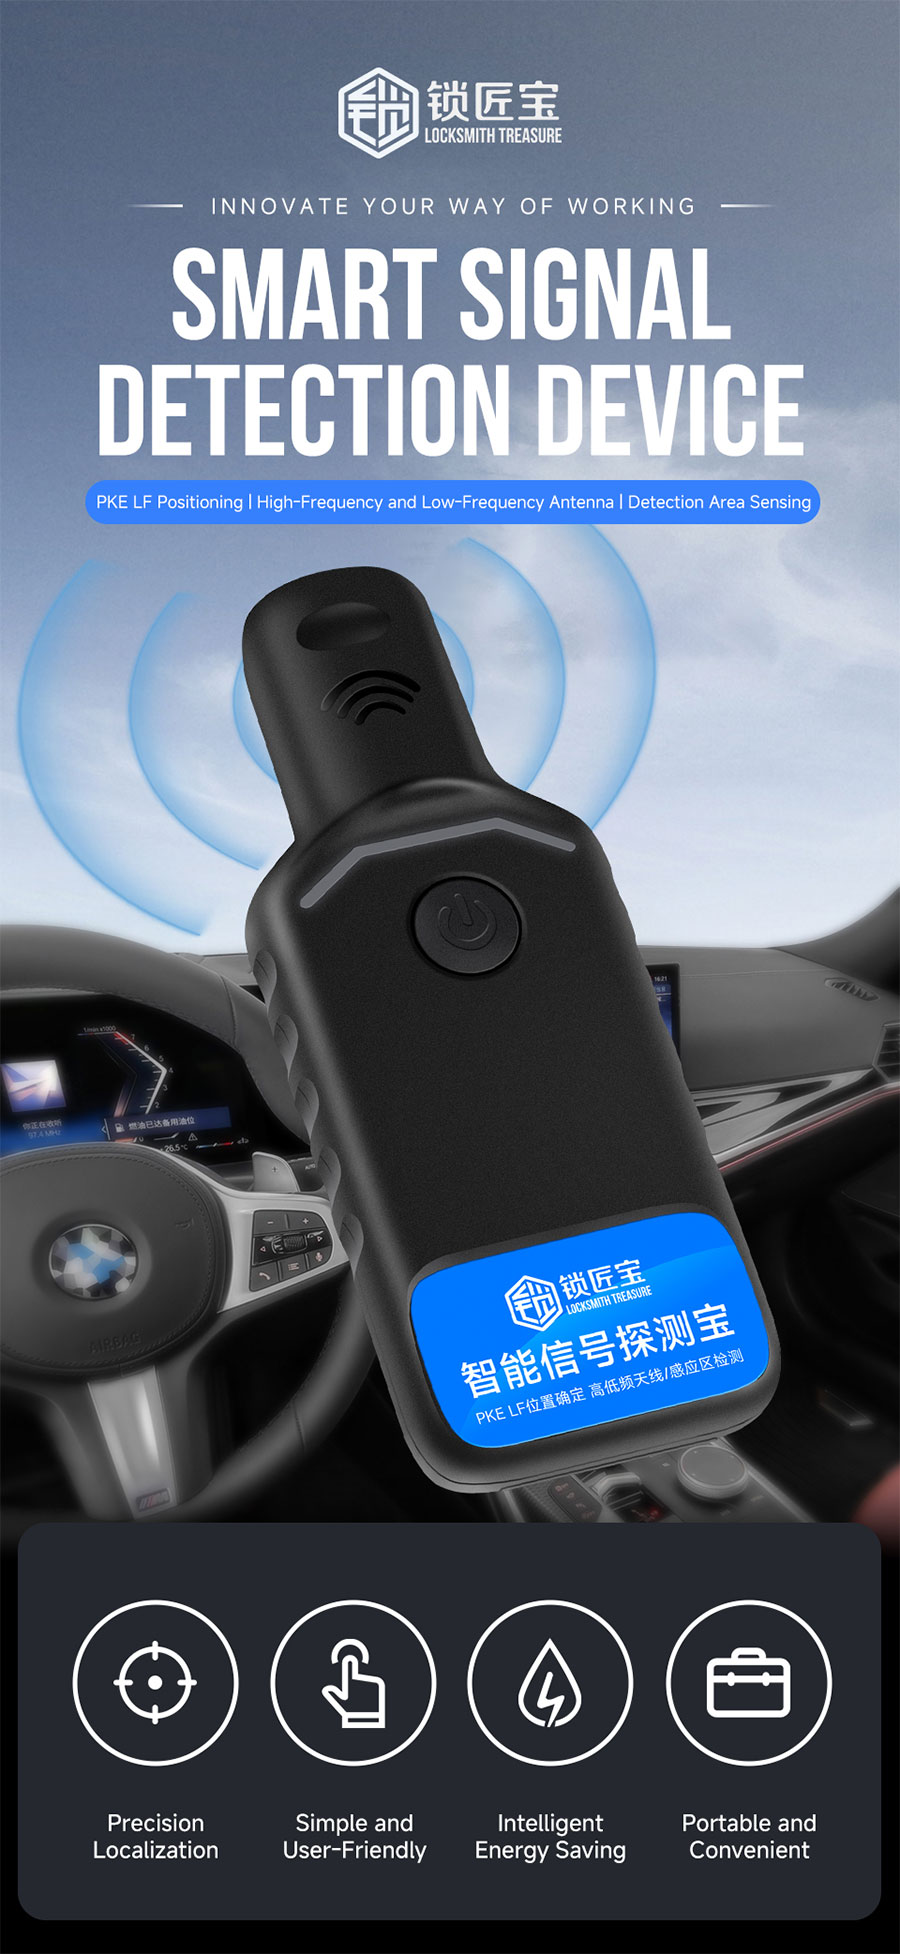 Smart Signal Detection Device Smart Signal Detector, Emergency Sensing Area Detecting for Cars, Motorcycles from A Long Distance